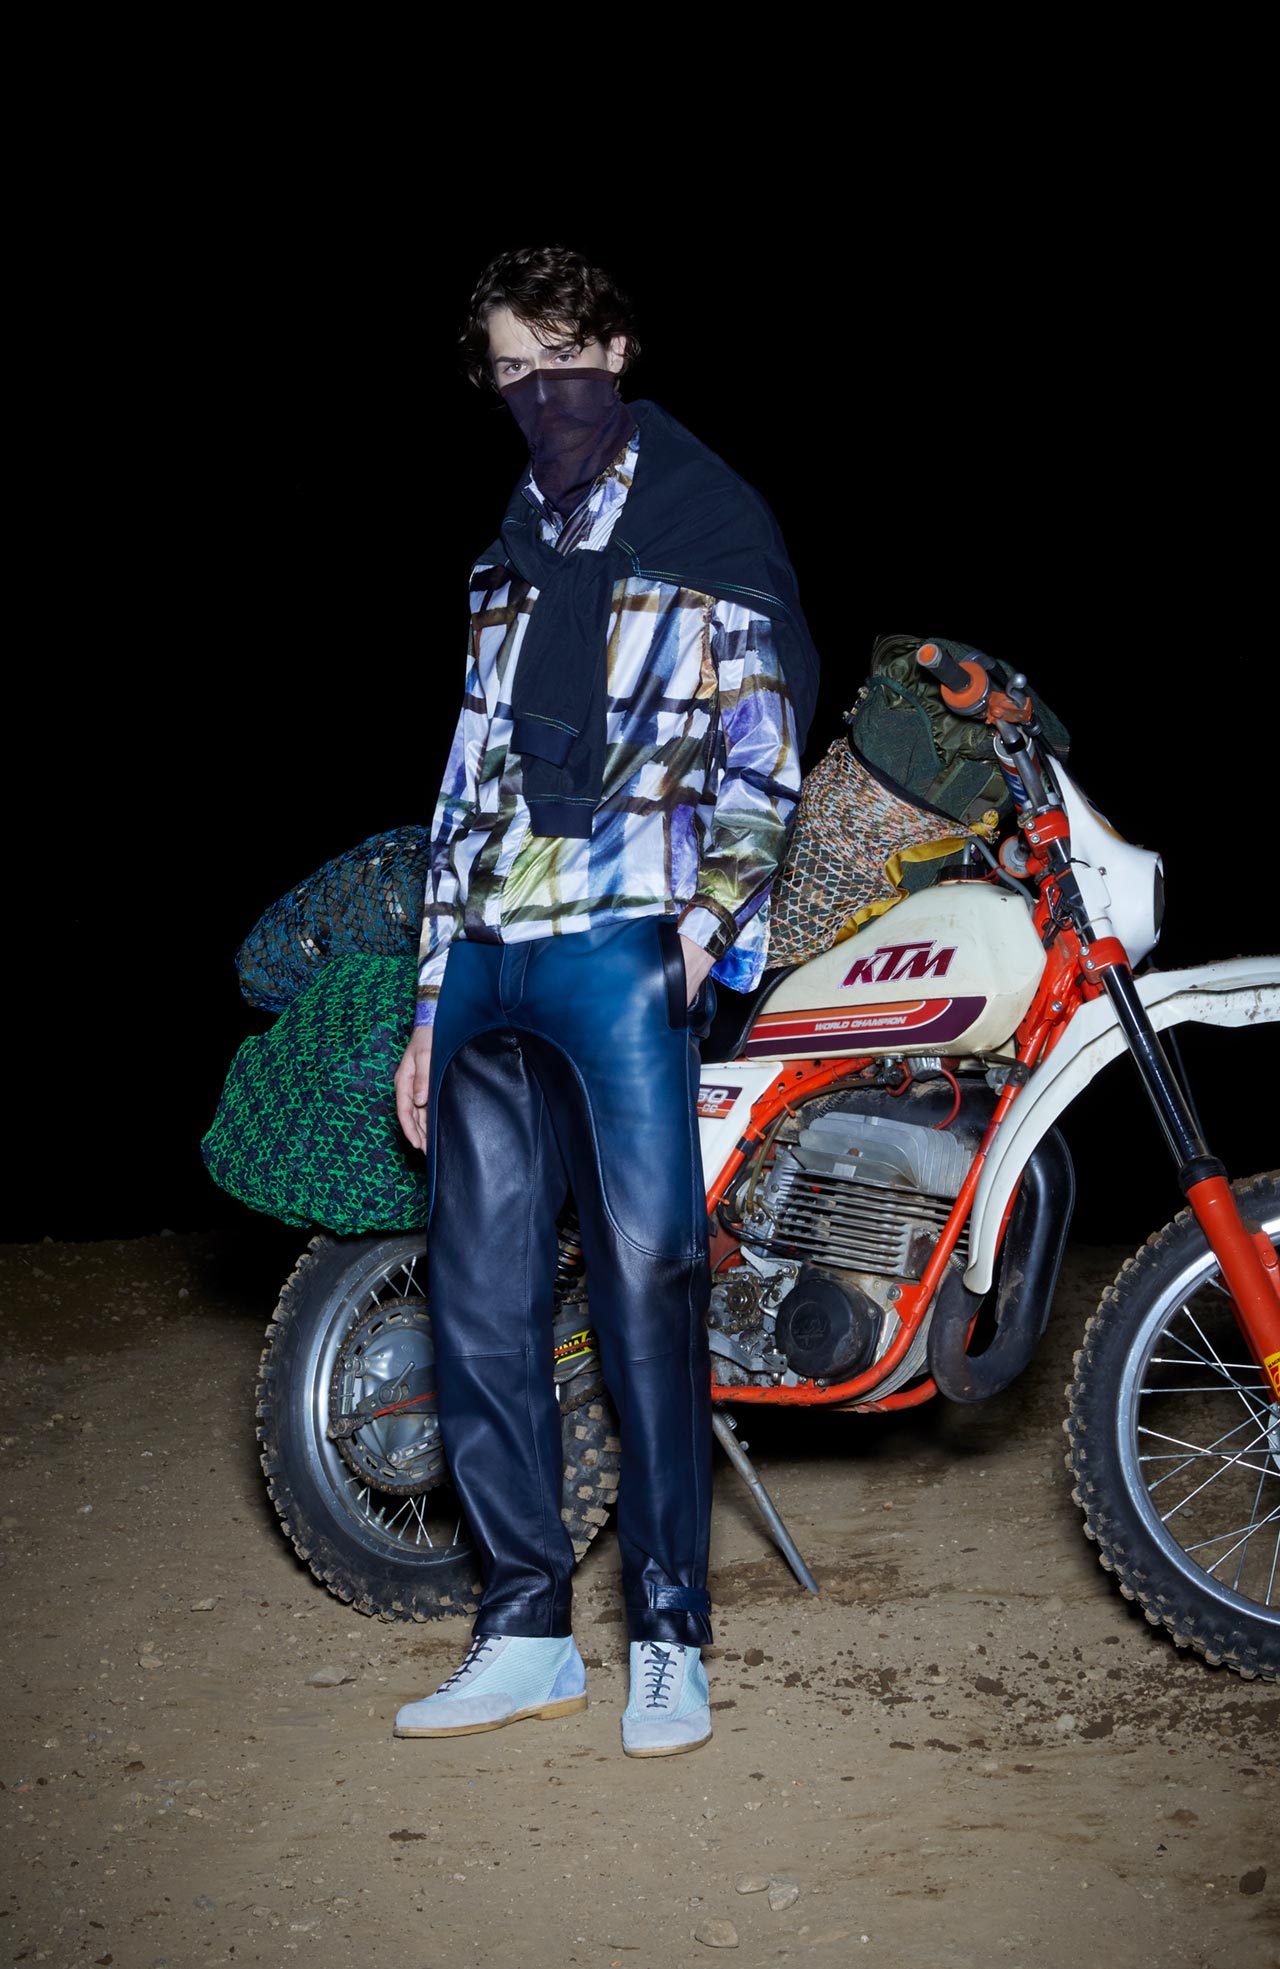 Misson's SS19 collection is inspired by the Paris to Dakar rally